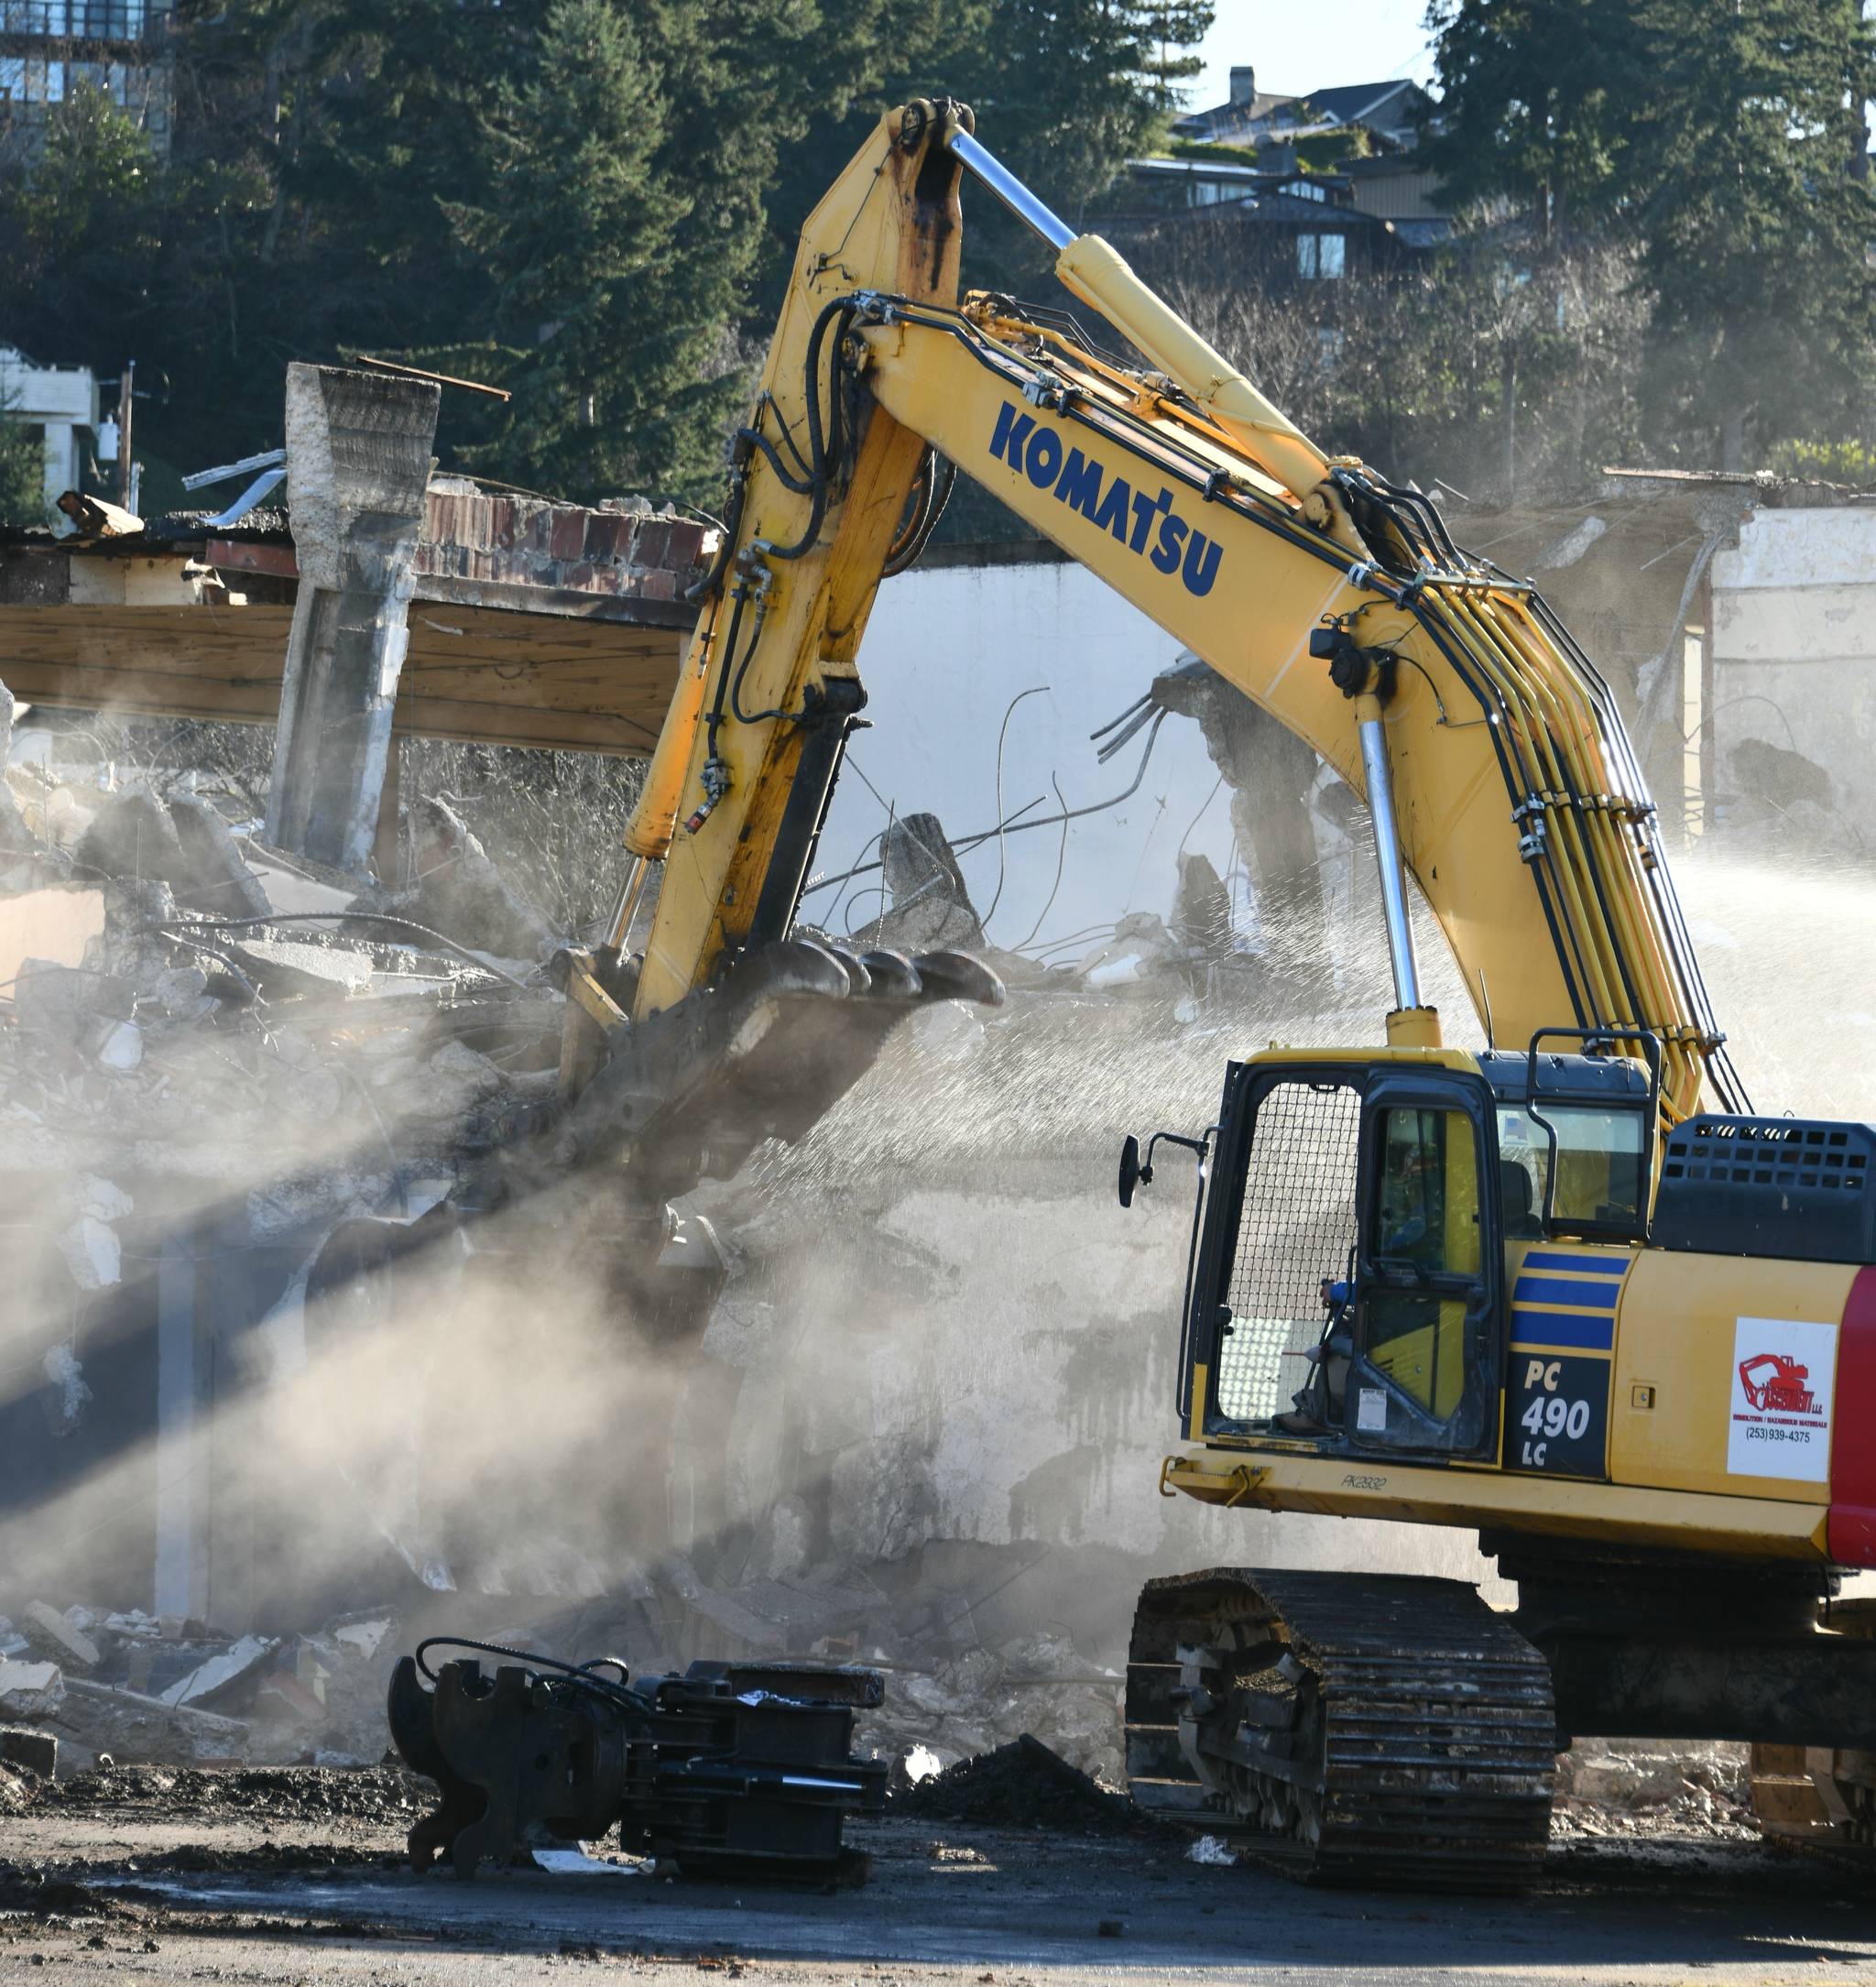 A demolition worker hammers away at the old East Seattle School with a machine on Dec. 28. The city issued a demolition permit for the school — which was built in 1914 — on Oct. 28. It is located at 2825 West Mercer Way. The city’s decision was informed by the Environmental Impact Statement (EIS), which was completed by EA Engineering, Science and Technology and examined the potential impacts of different alternative actions. An architectural assessment report in the final EIS, notes that, “for the most part the buildings have reached the end of their architectural lifespan without extensive, and costly rehabilitation.” According to the city website, the property will be subdivided into 14 residential lots. More on the story to come this week. Andy Nystrom/ Reporter